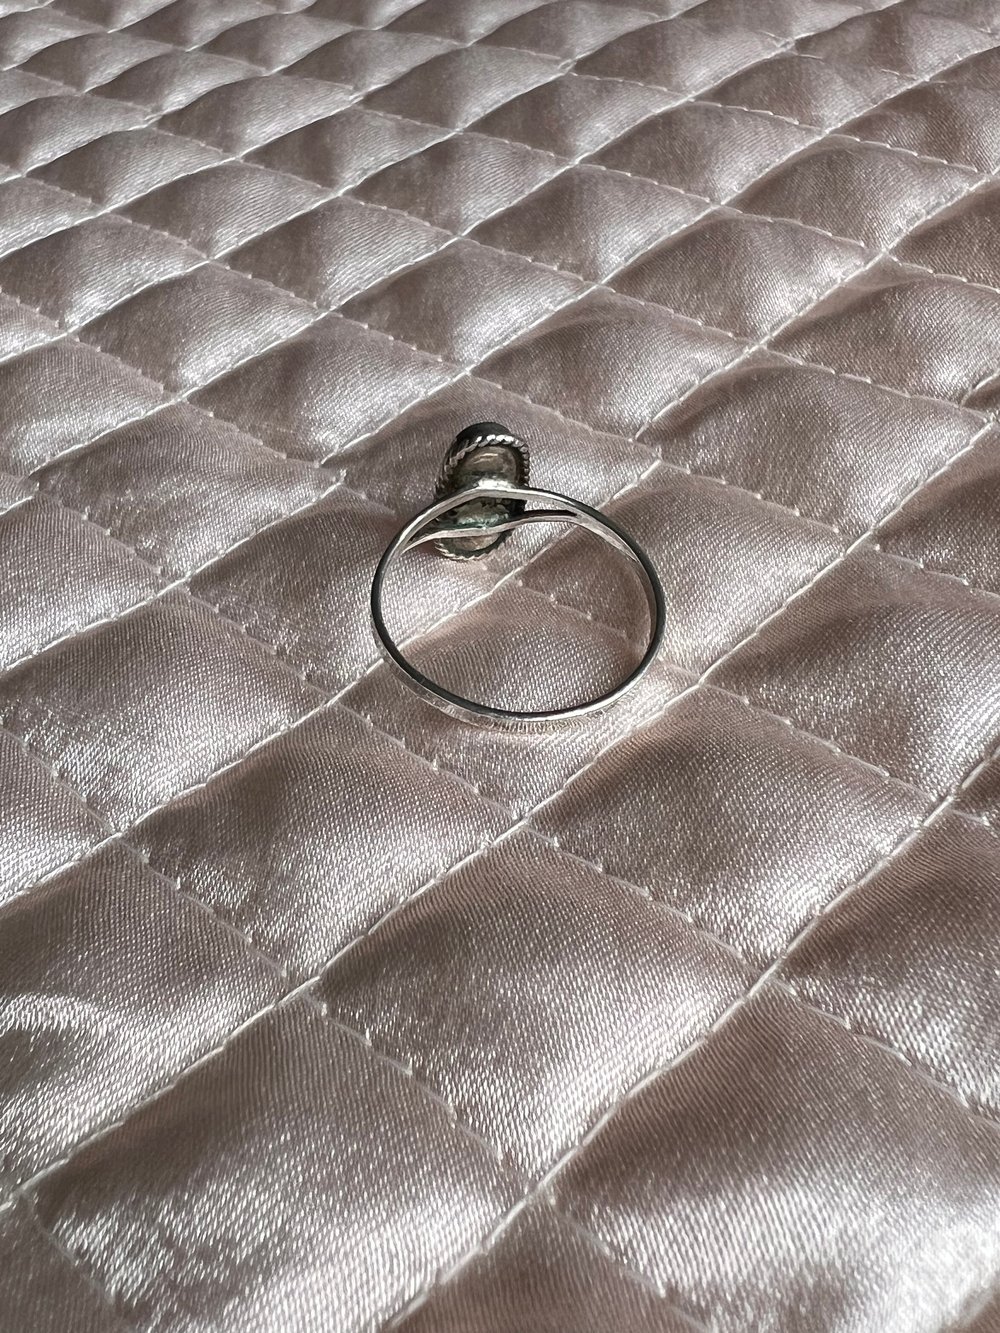 Sterling and Small Rose Quartz Ring (7.75)